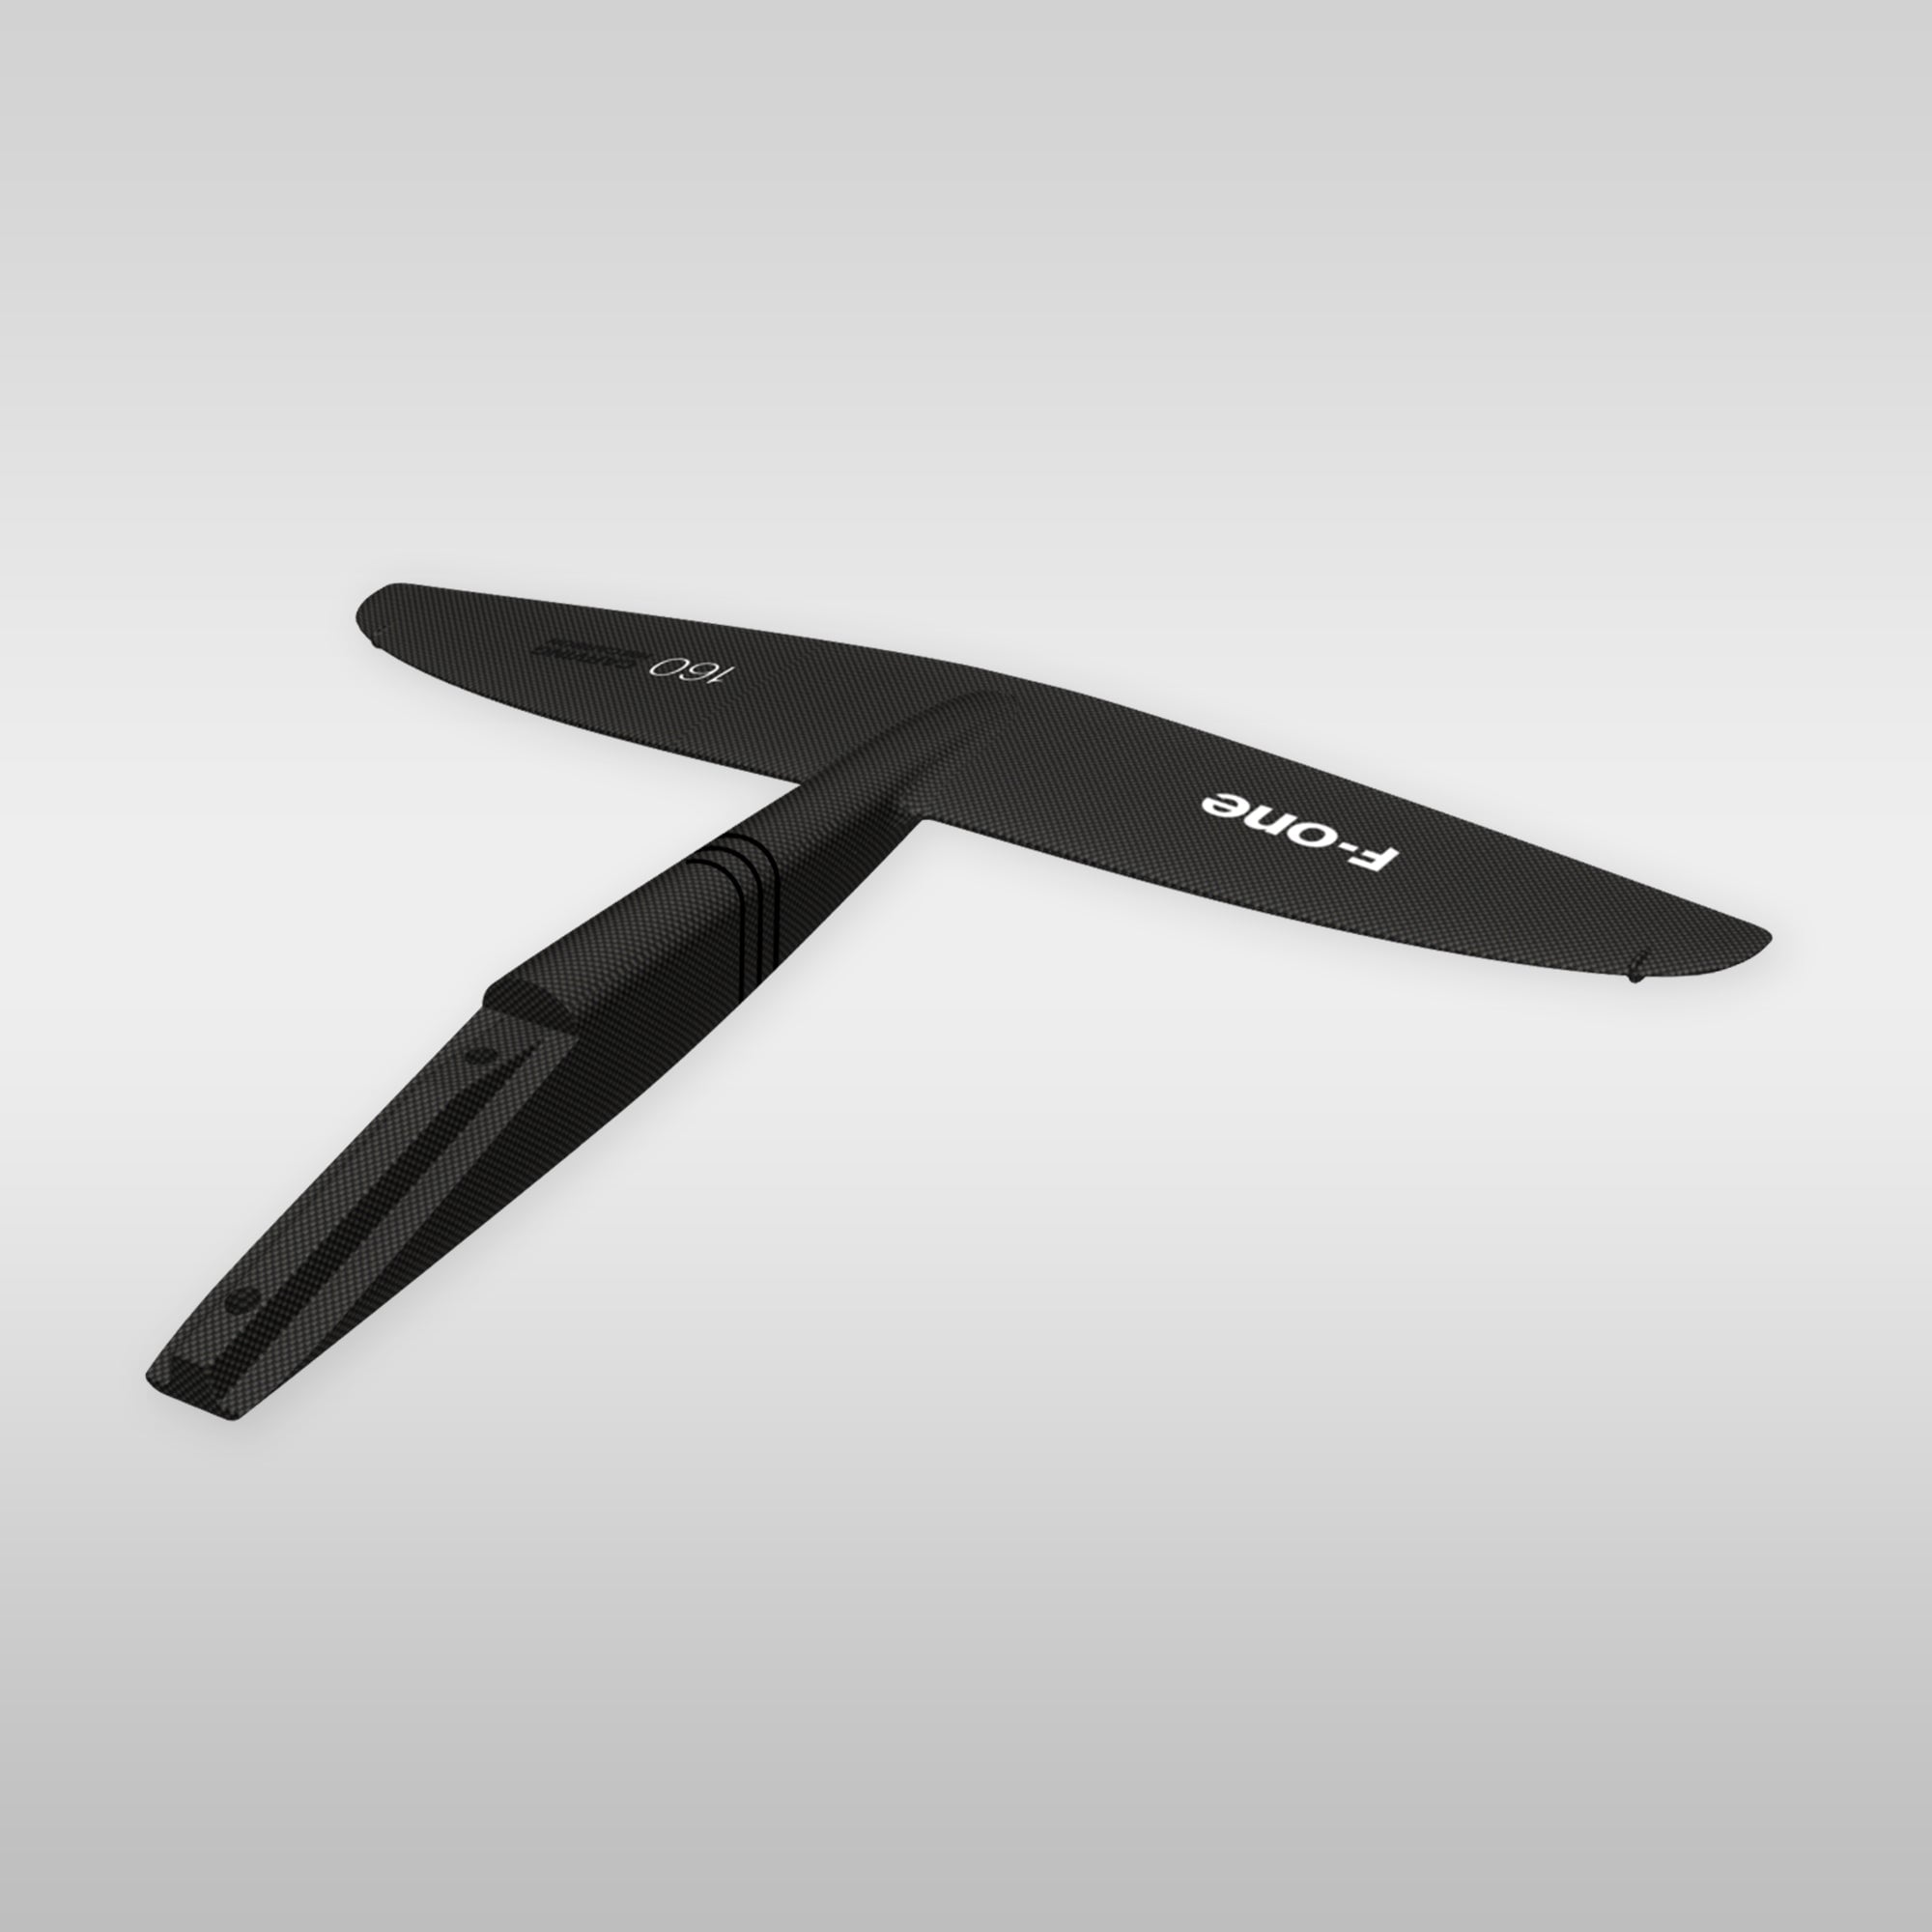 wingfoil wingfoiling foil f-one monobloc tail Rearwing Carving